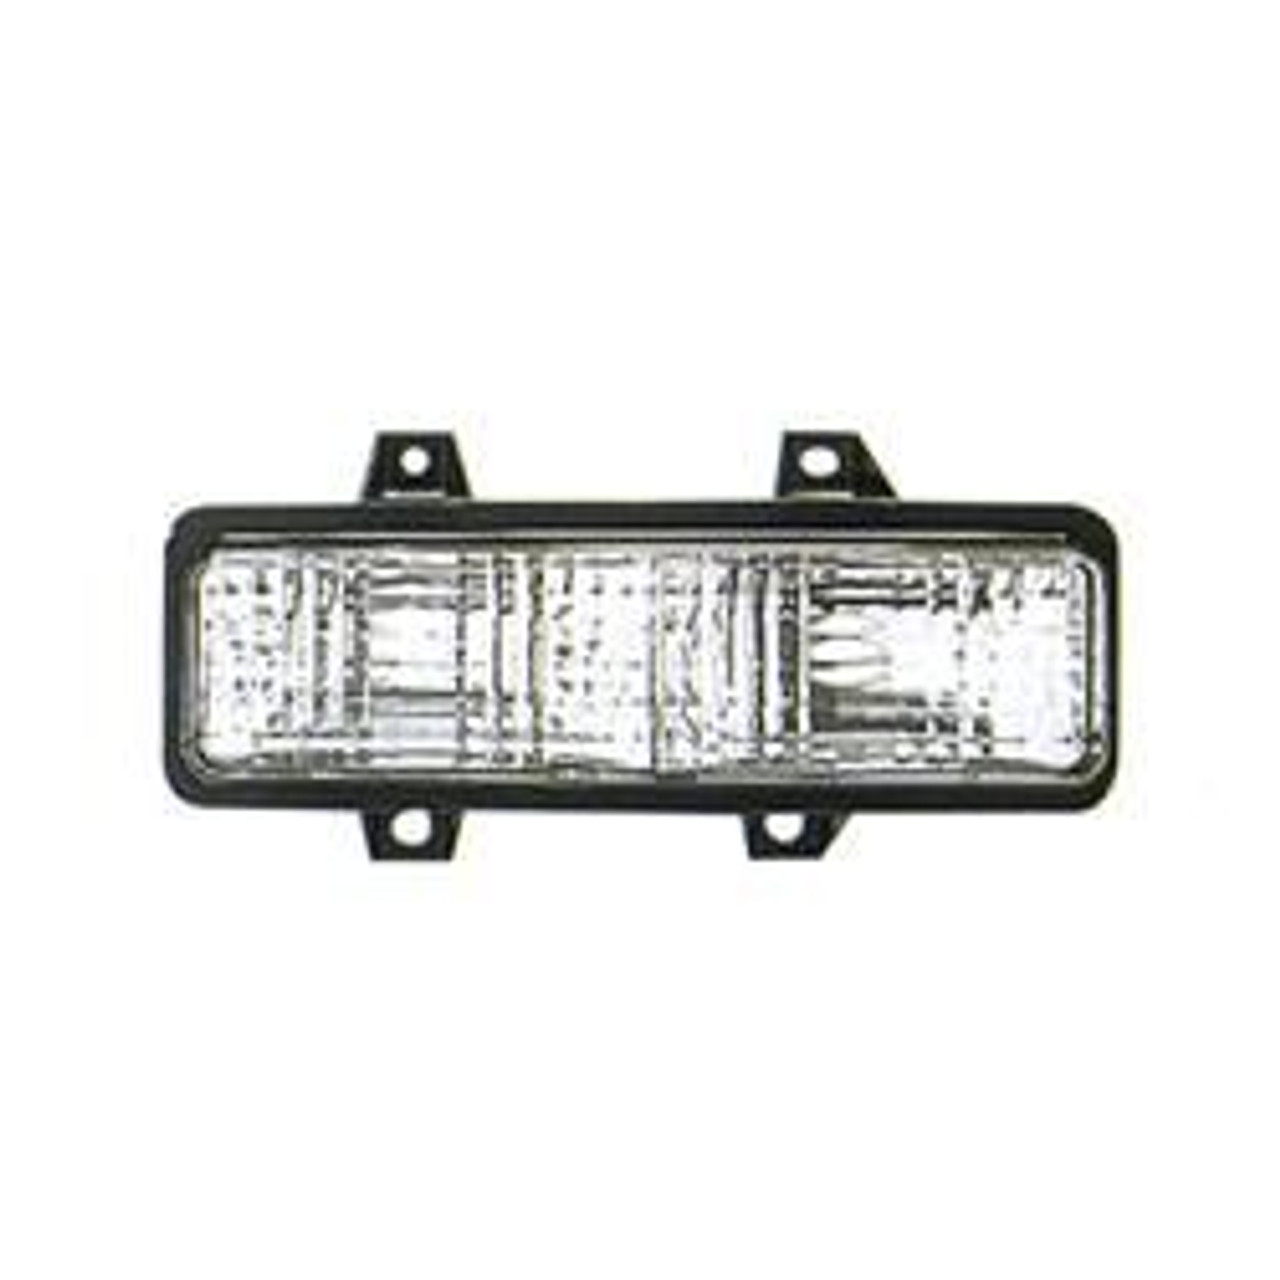 1989-91 Chevy/GMC Truck Park Lamp Assembly LH (fits Blazer, Suburban, & Dually w/ Dual Headlamps)